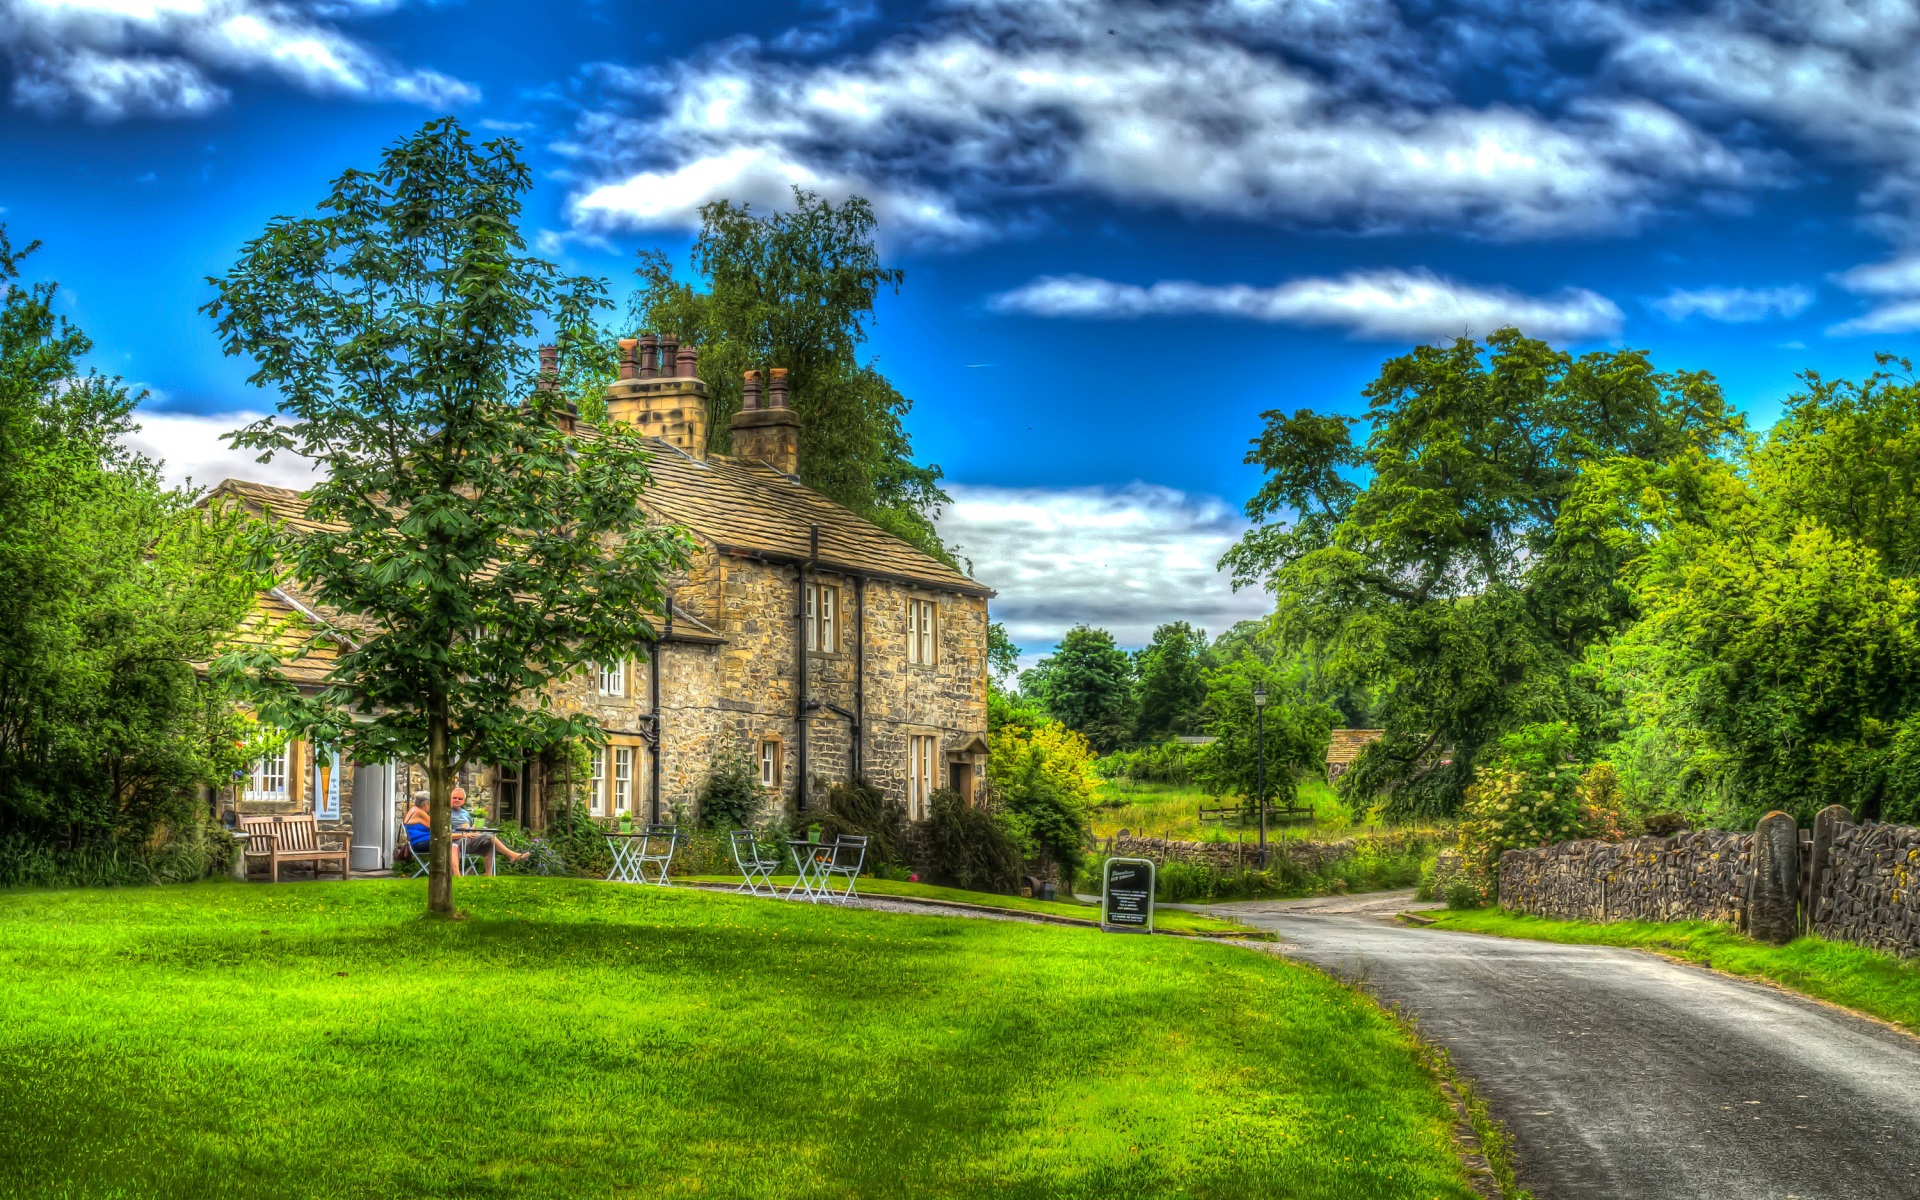 Architecture Downham England Grass Hdr House Man Made Tree 1920x1200